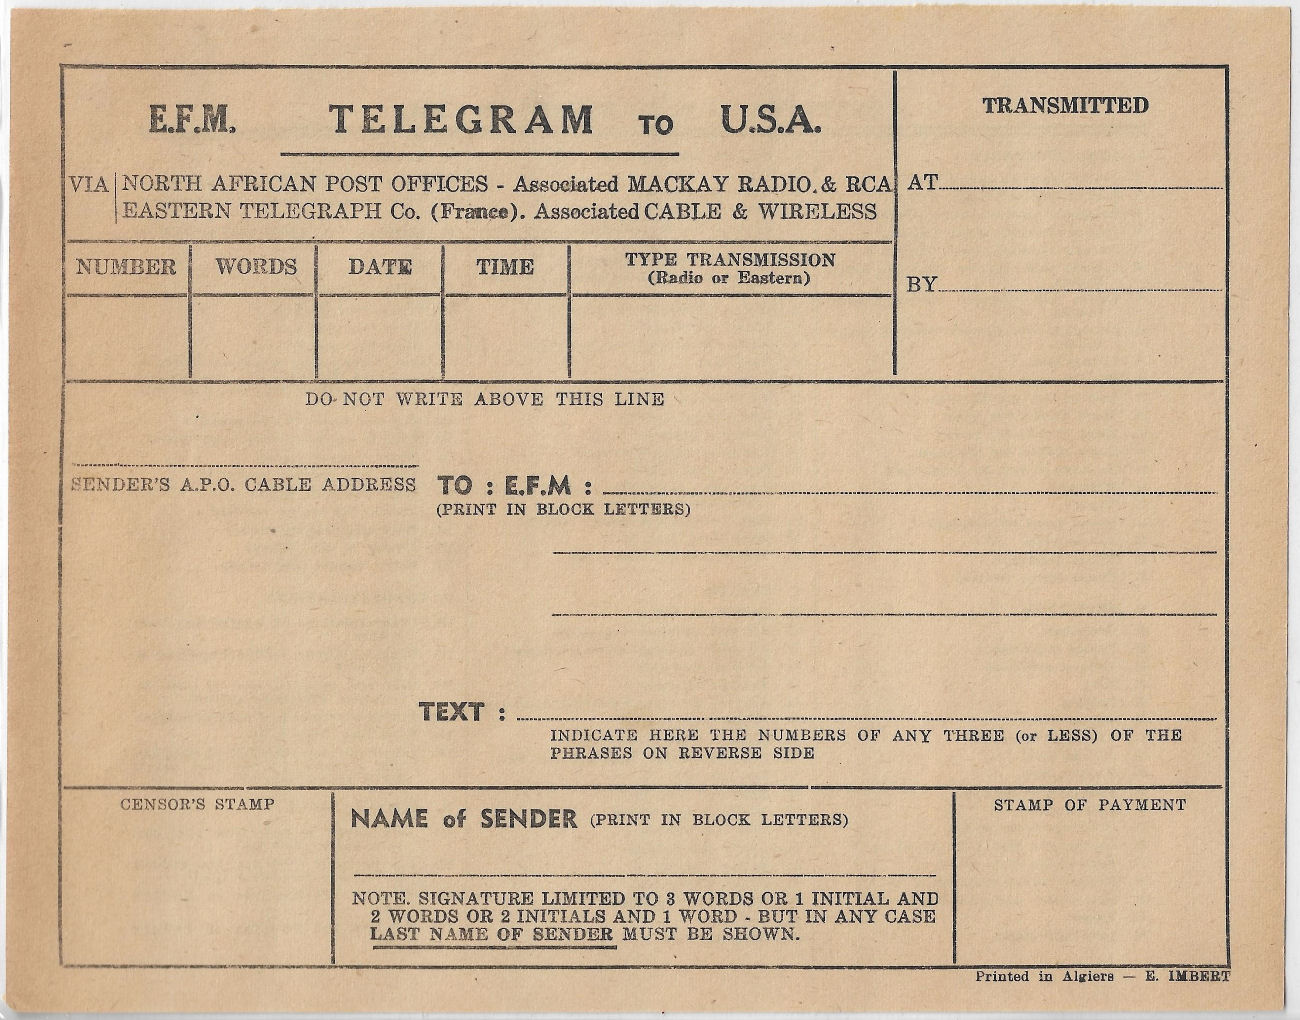 U.S. Army form - front